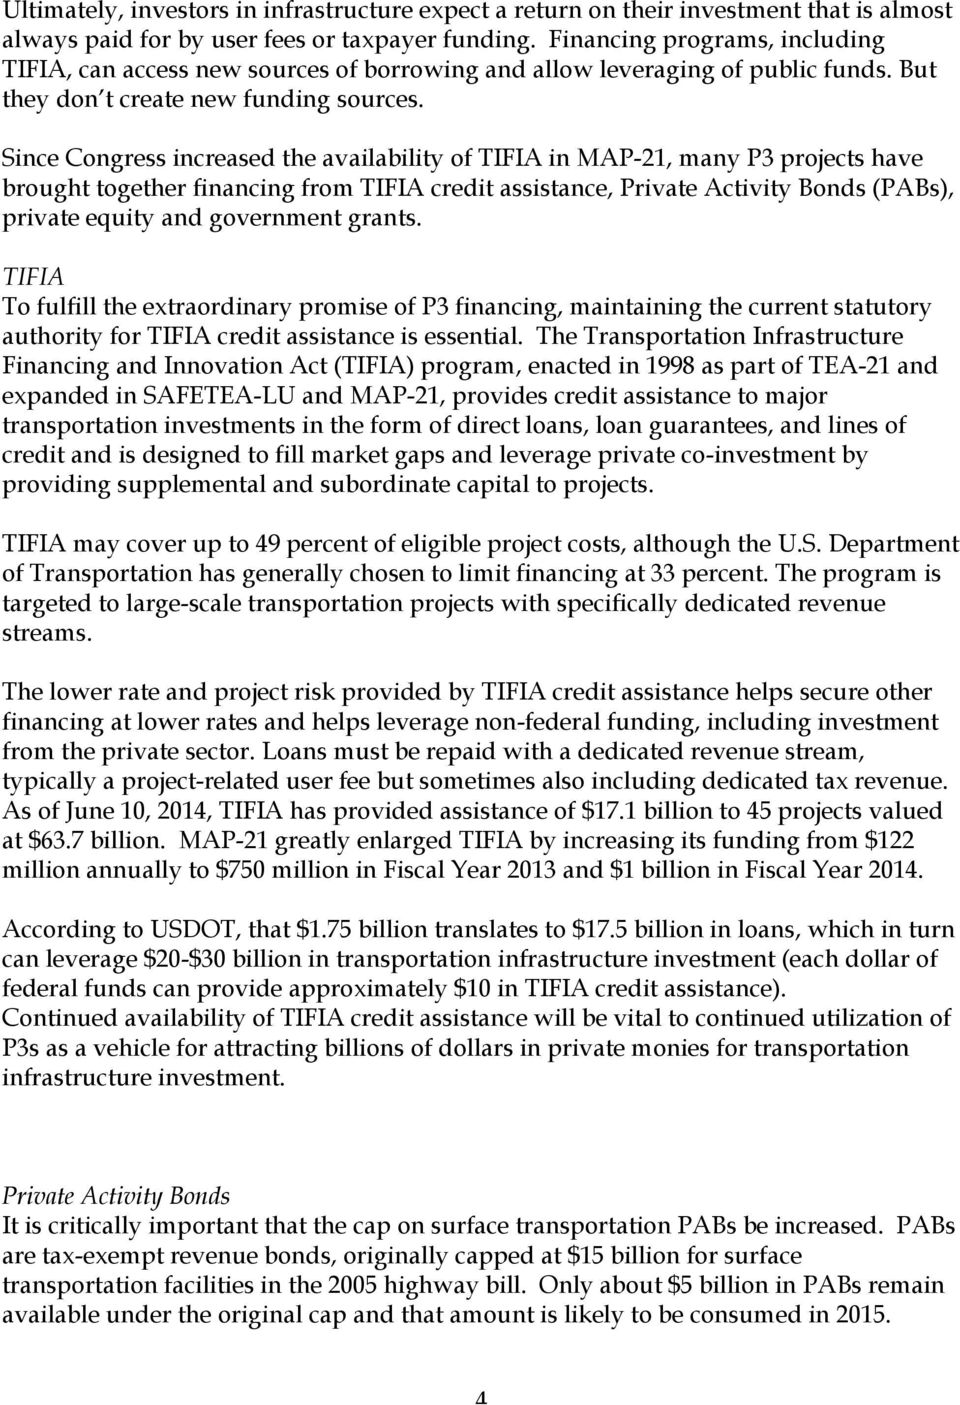 Since Congress increased the availability of TIFIA in MAP-21, many P3 projects have brought together financing from TIFIA credit assistance, Private Activity Bonds (PABs), private equity and